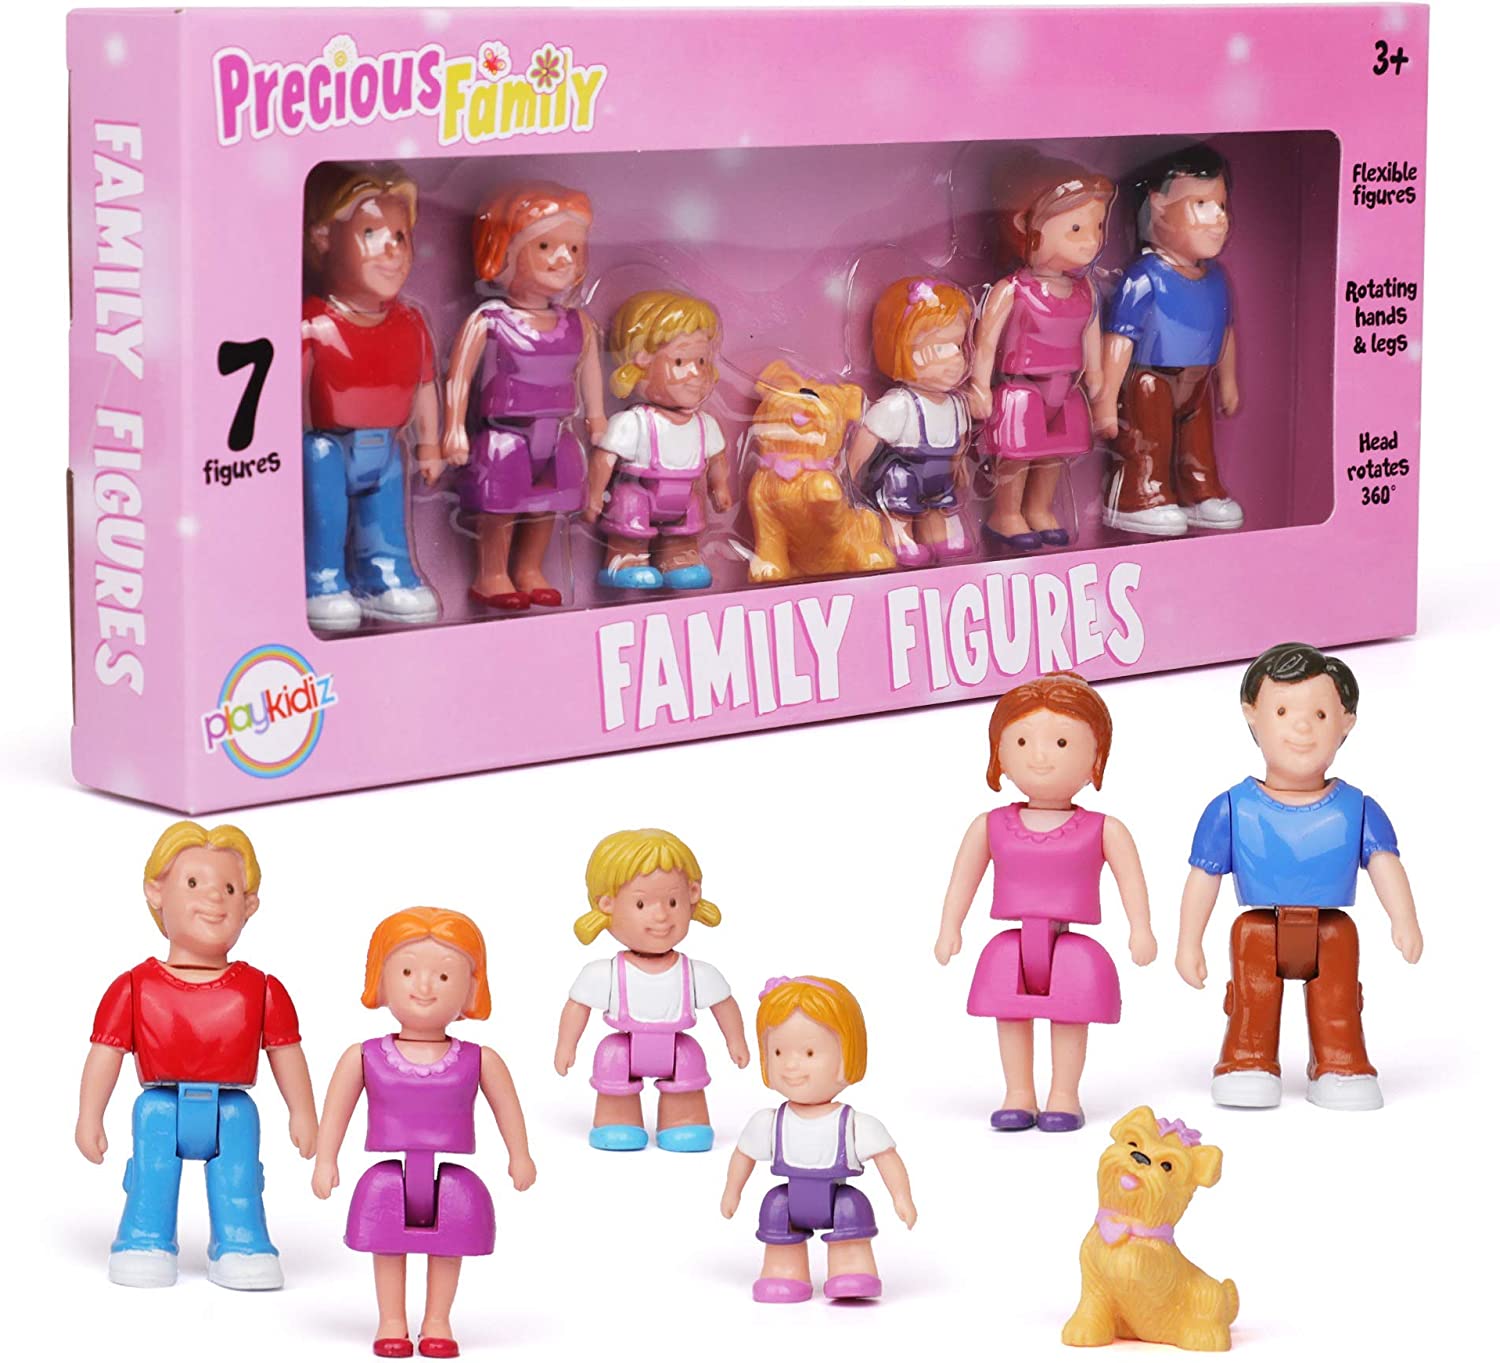 Playkidz Family Figures Dollhouse People Mini Toy Figures for Doll Houses, Set of 7 - image 1 of 7